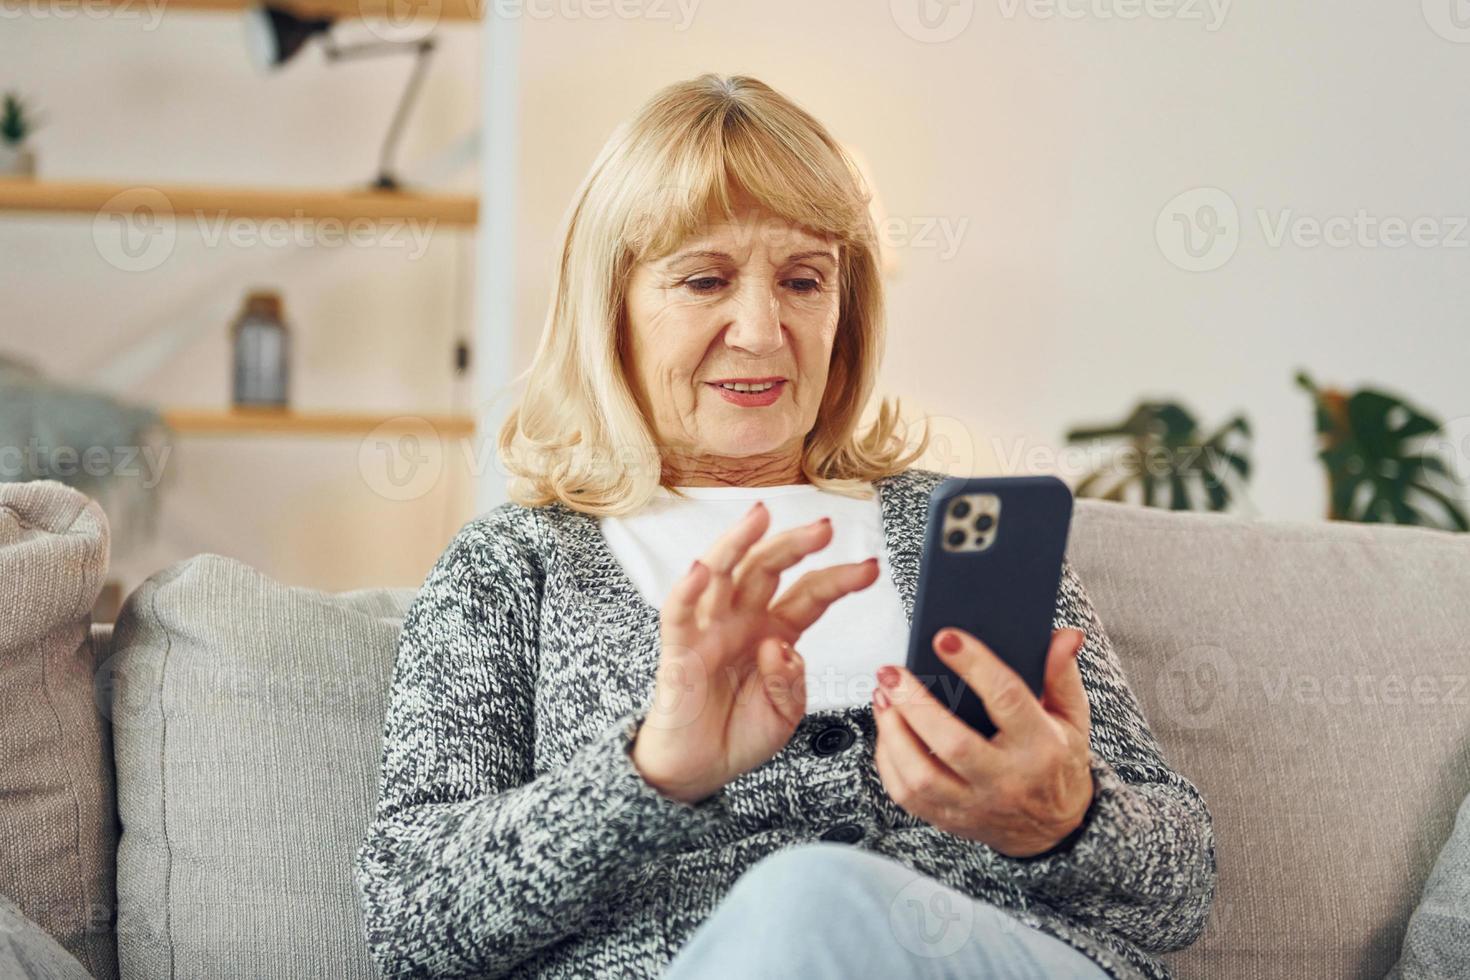 Sitting and holding phone. Senior woman with blonde hair is at home photo